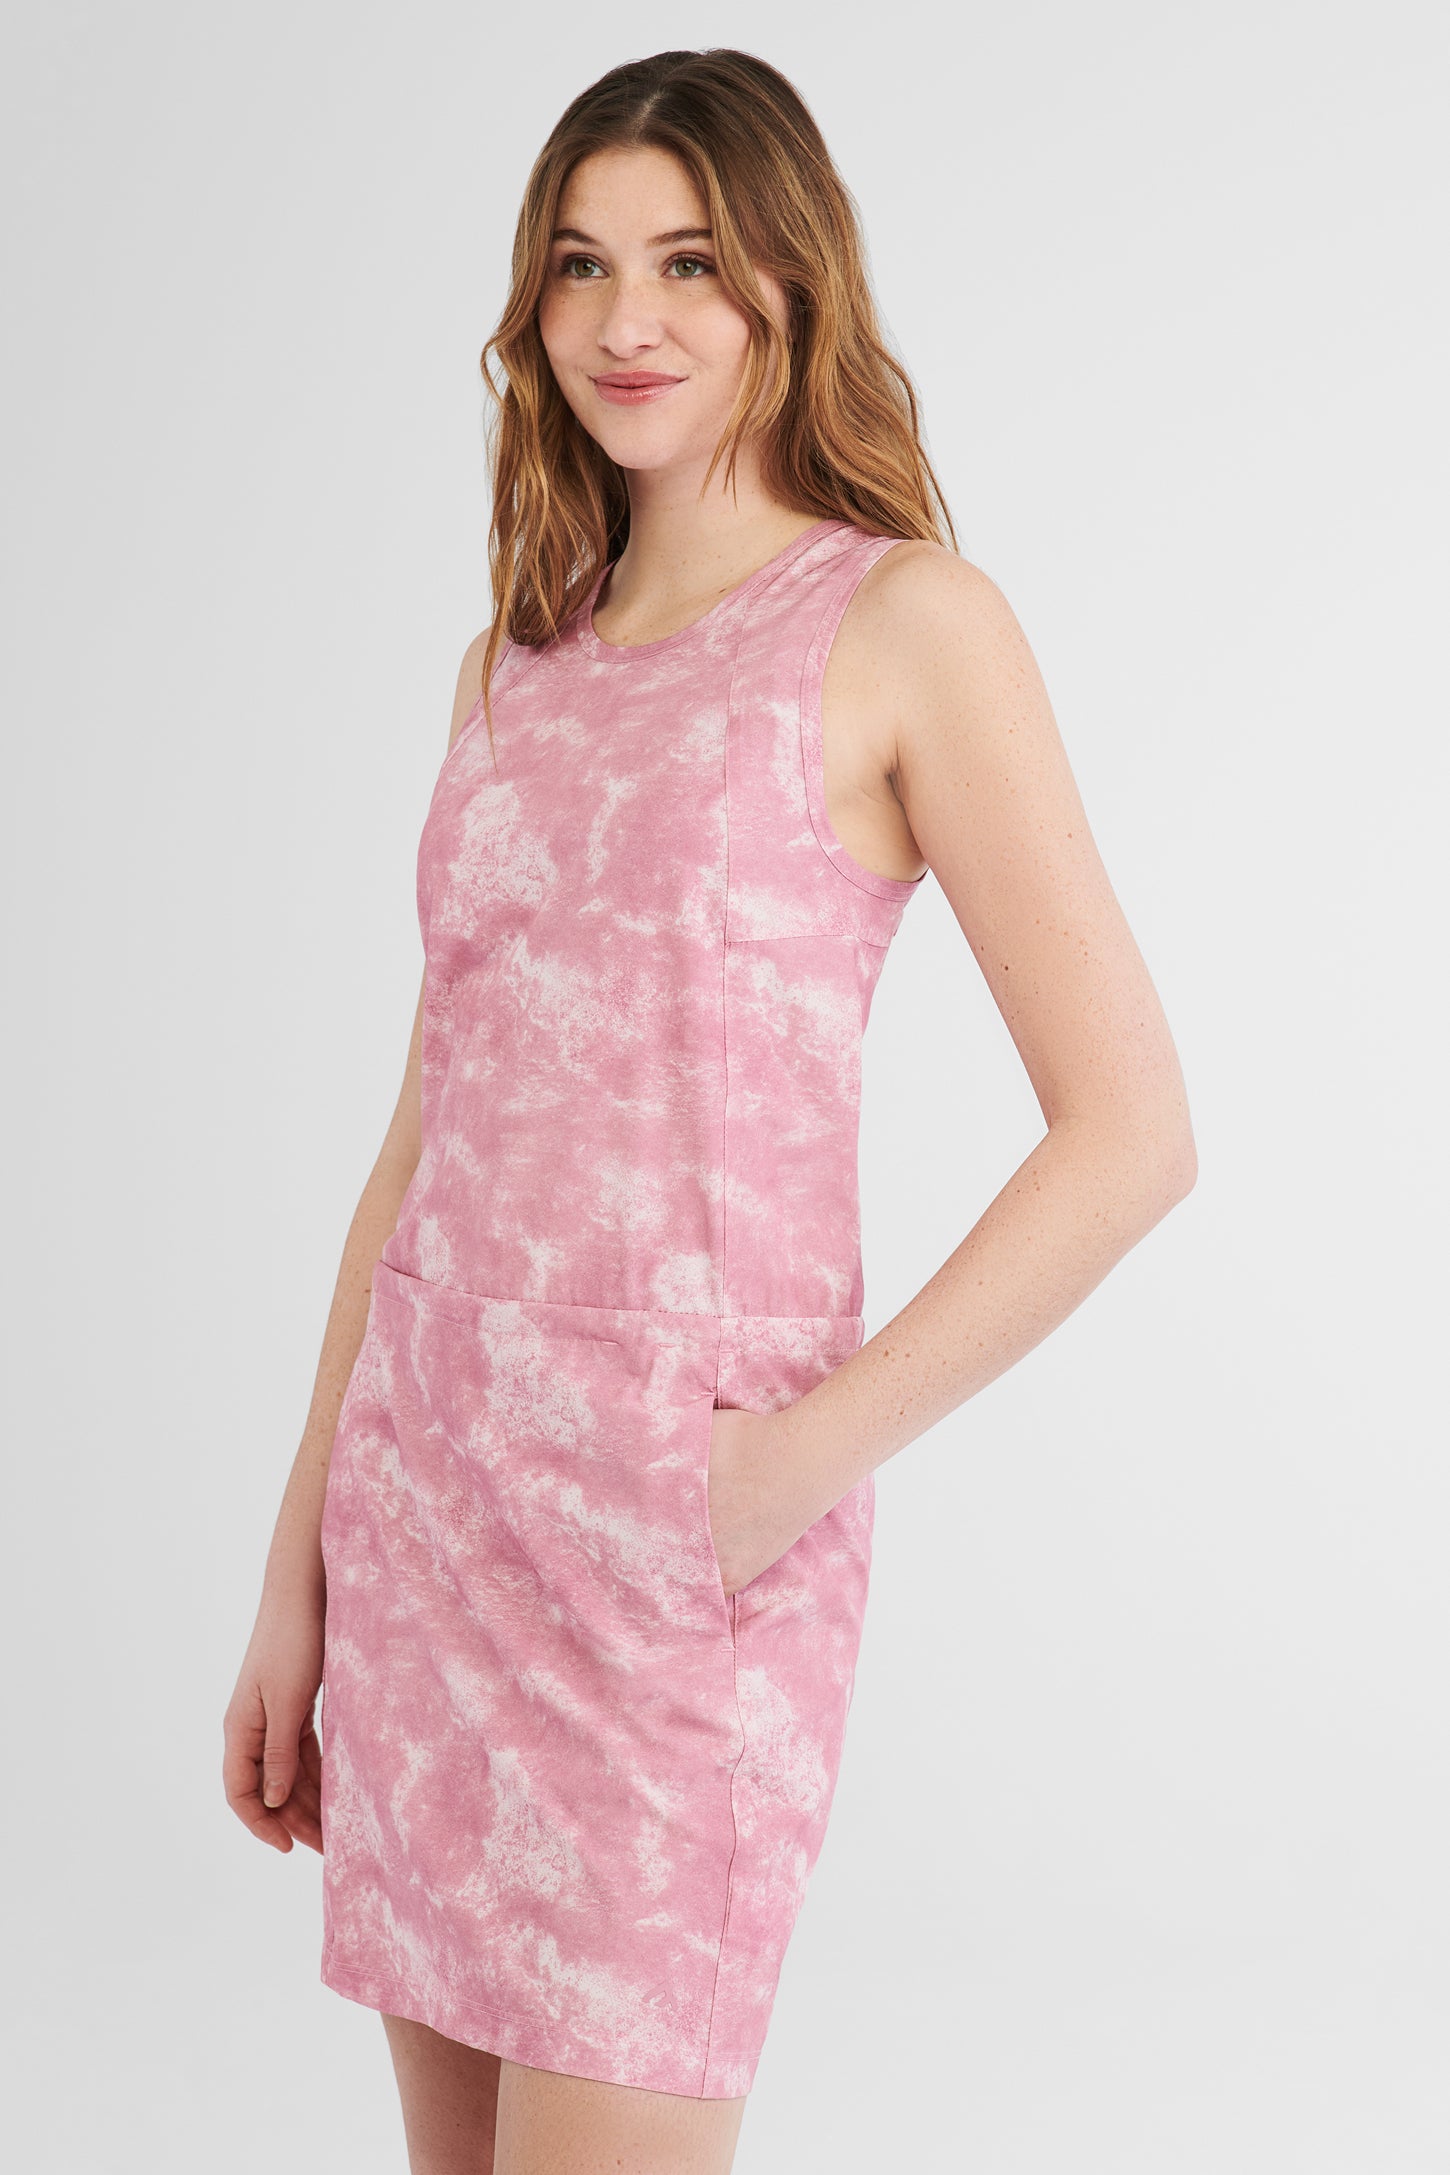 Robe sans manches avec protection FPU - Femme && ROSE